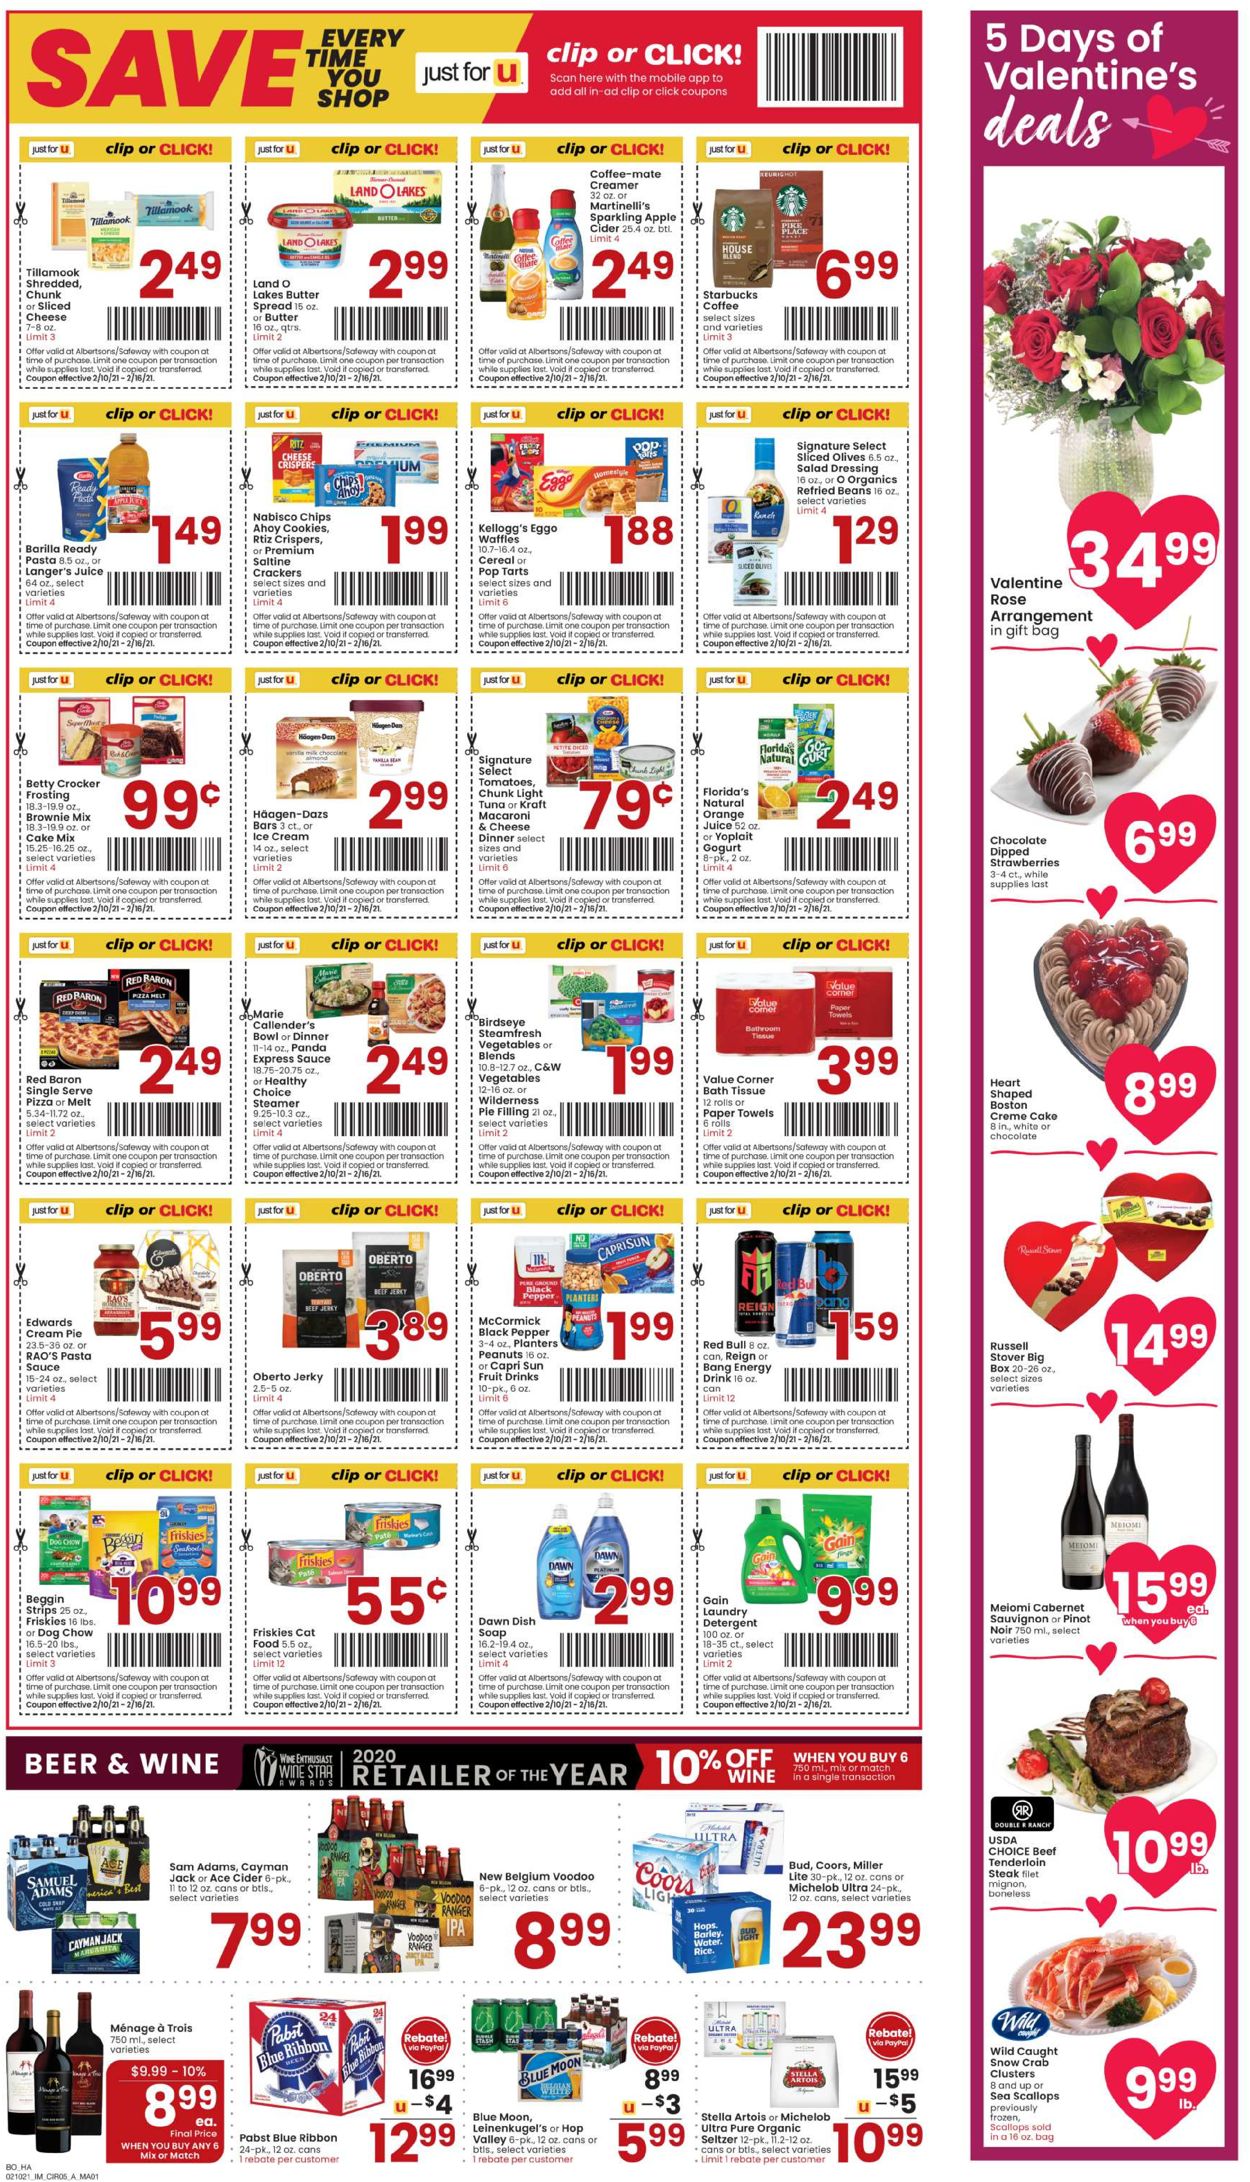 Albertsons Current weekly ad 02/10 - 02/16/2021 [5] - frequent-ads.com